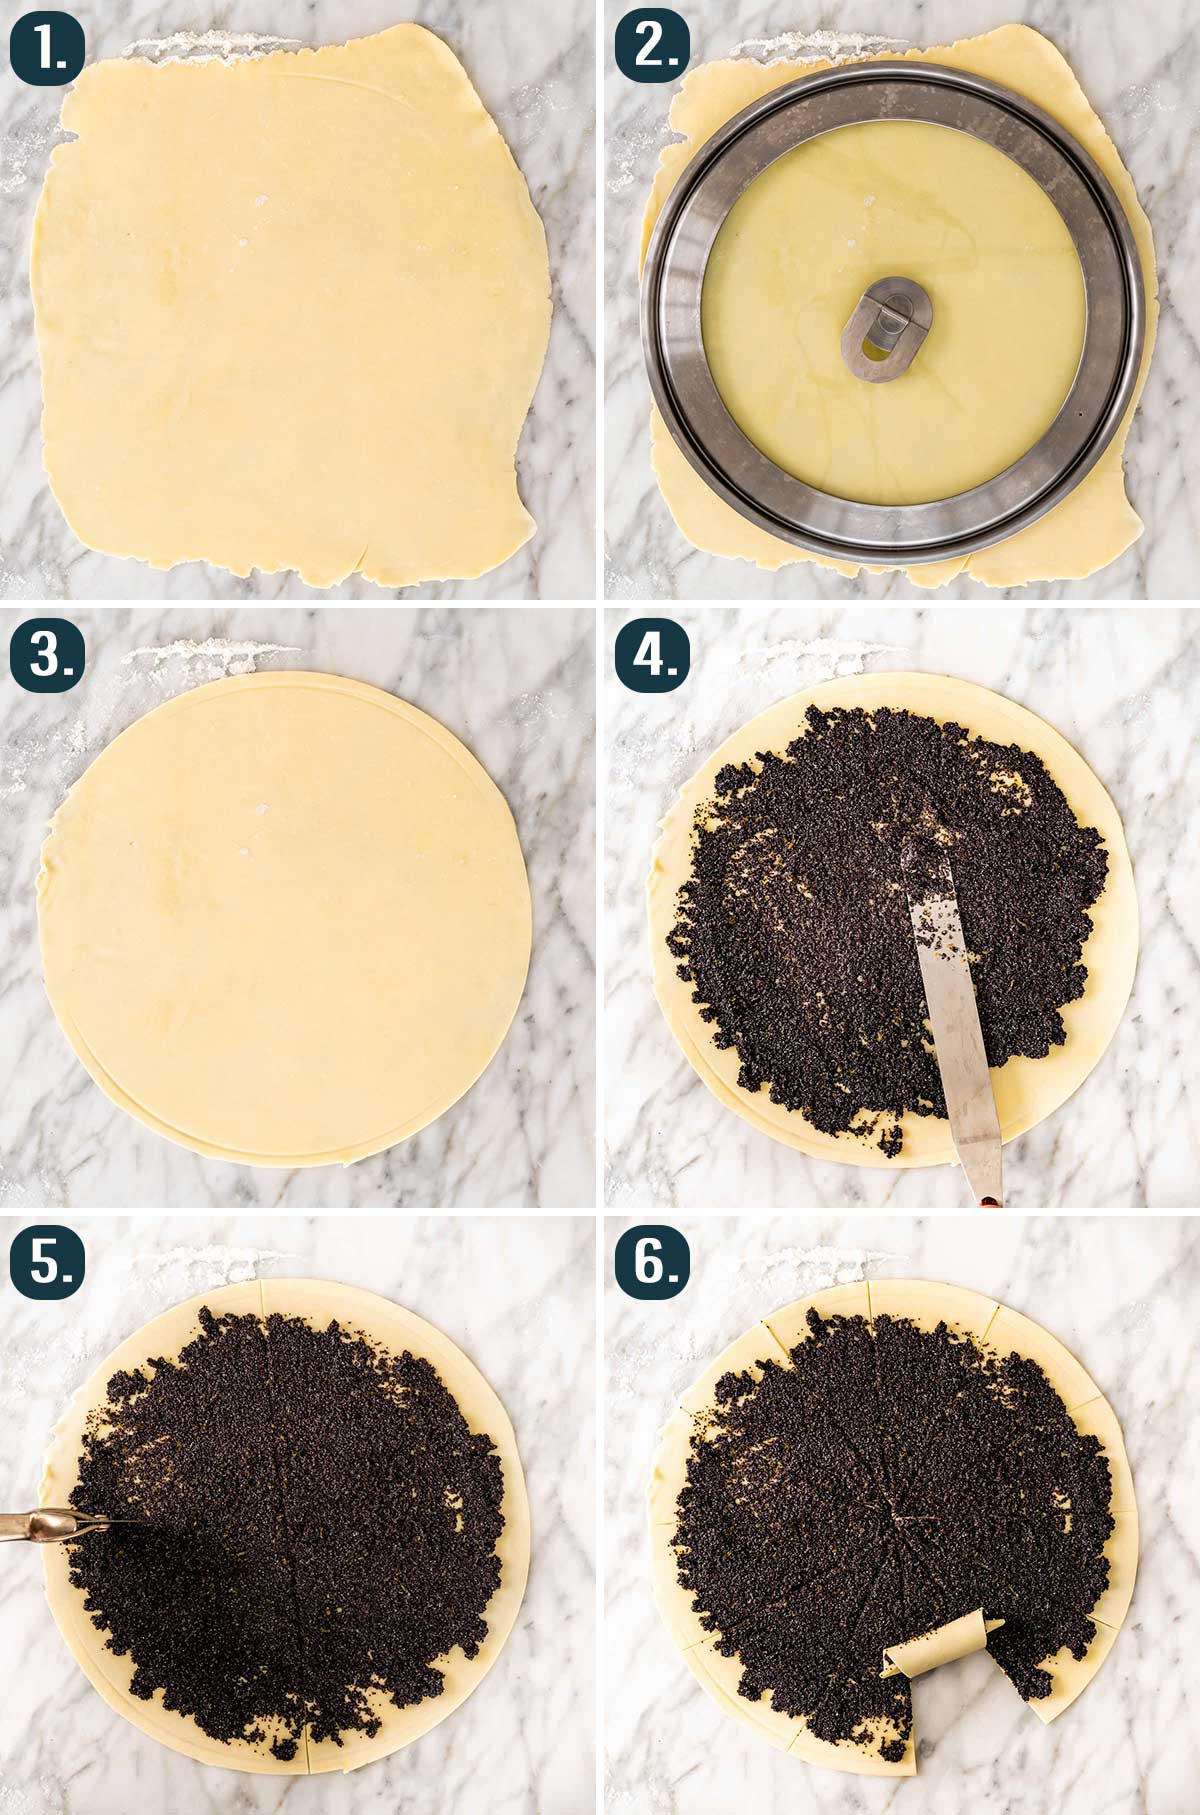 detailed process shots showing how to make poppy seed rugelach cookies.